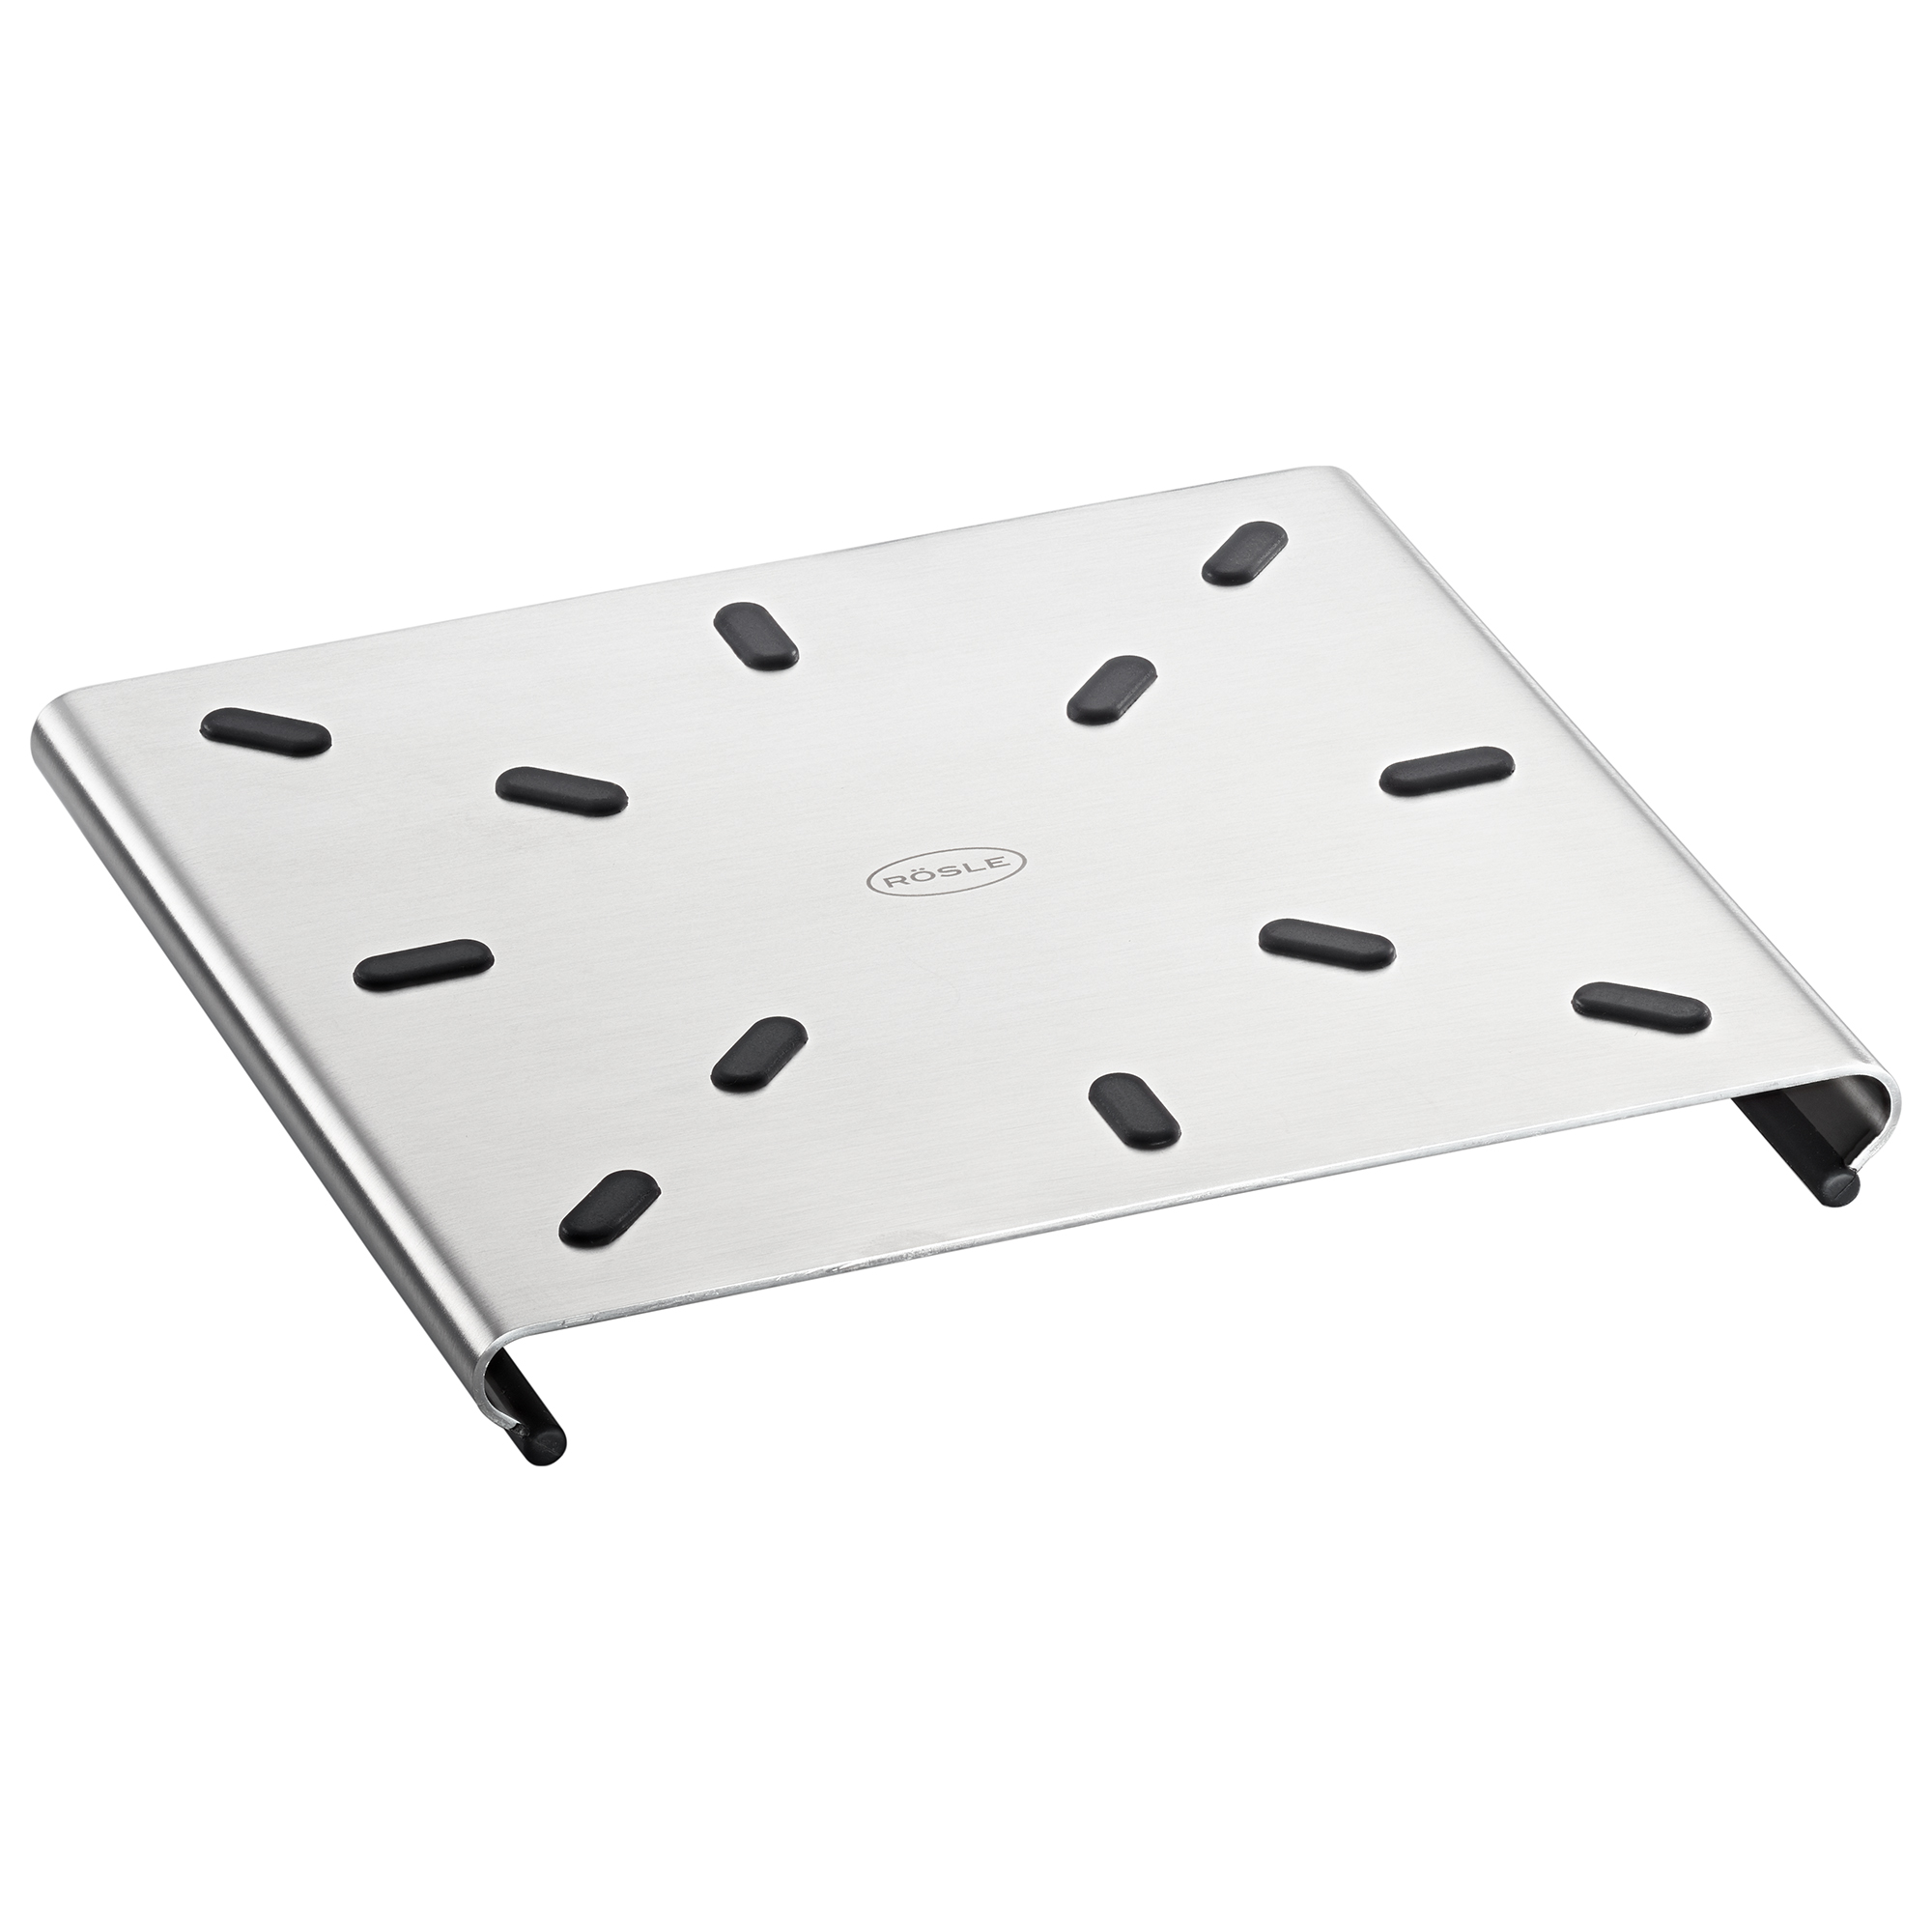 Pot Holder stainless steel 18x18cm | 7.1x7.1 in.